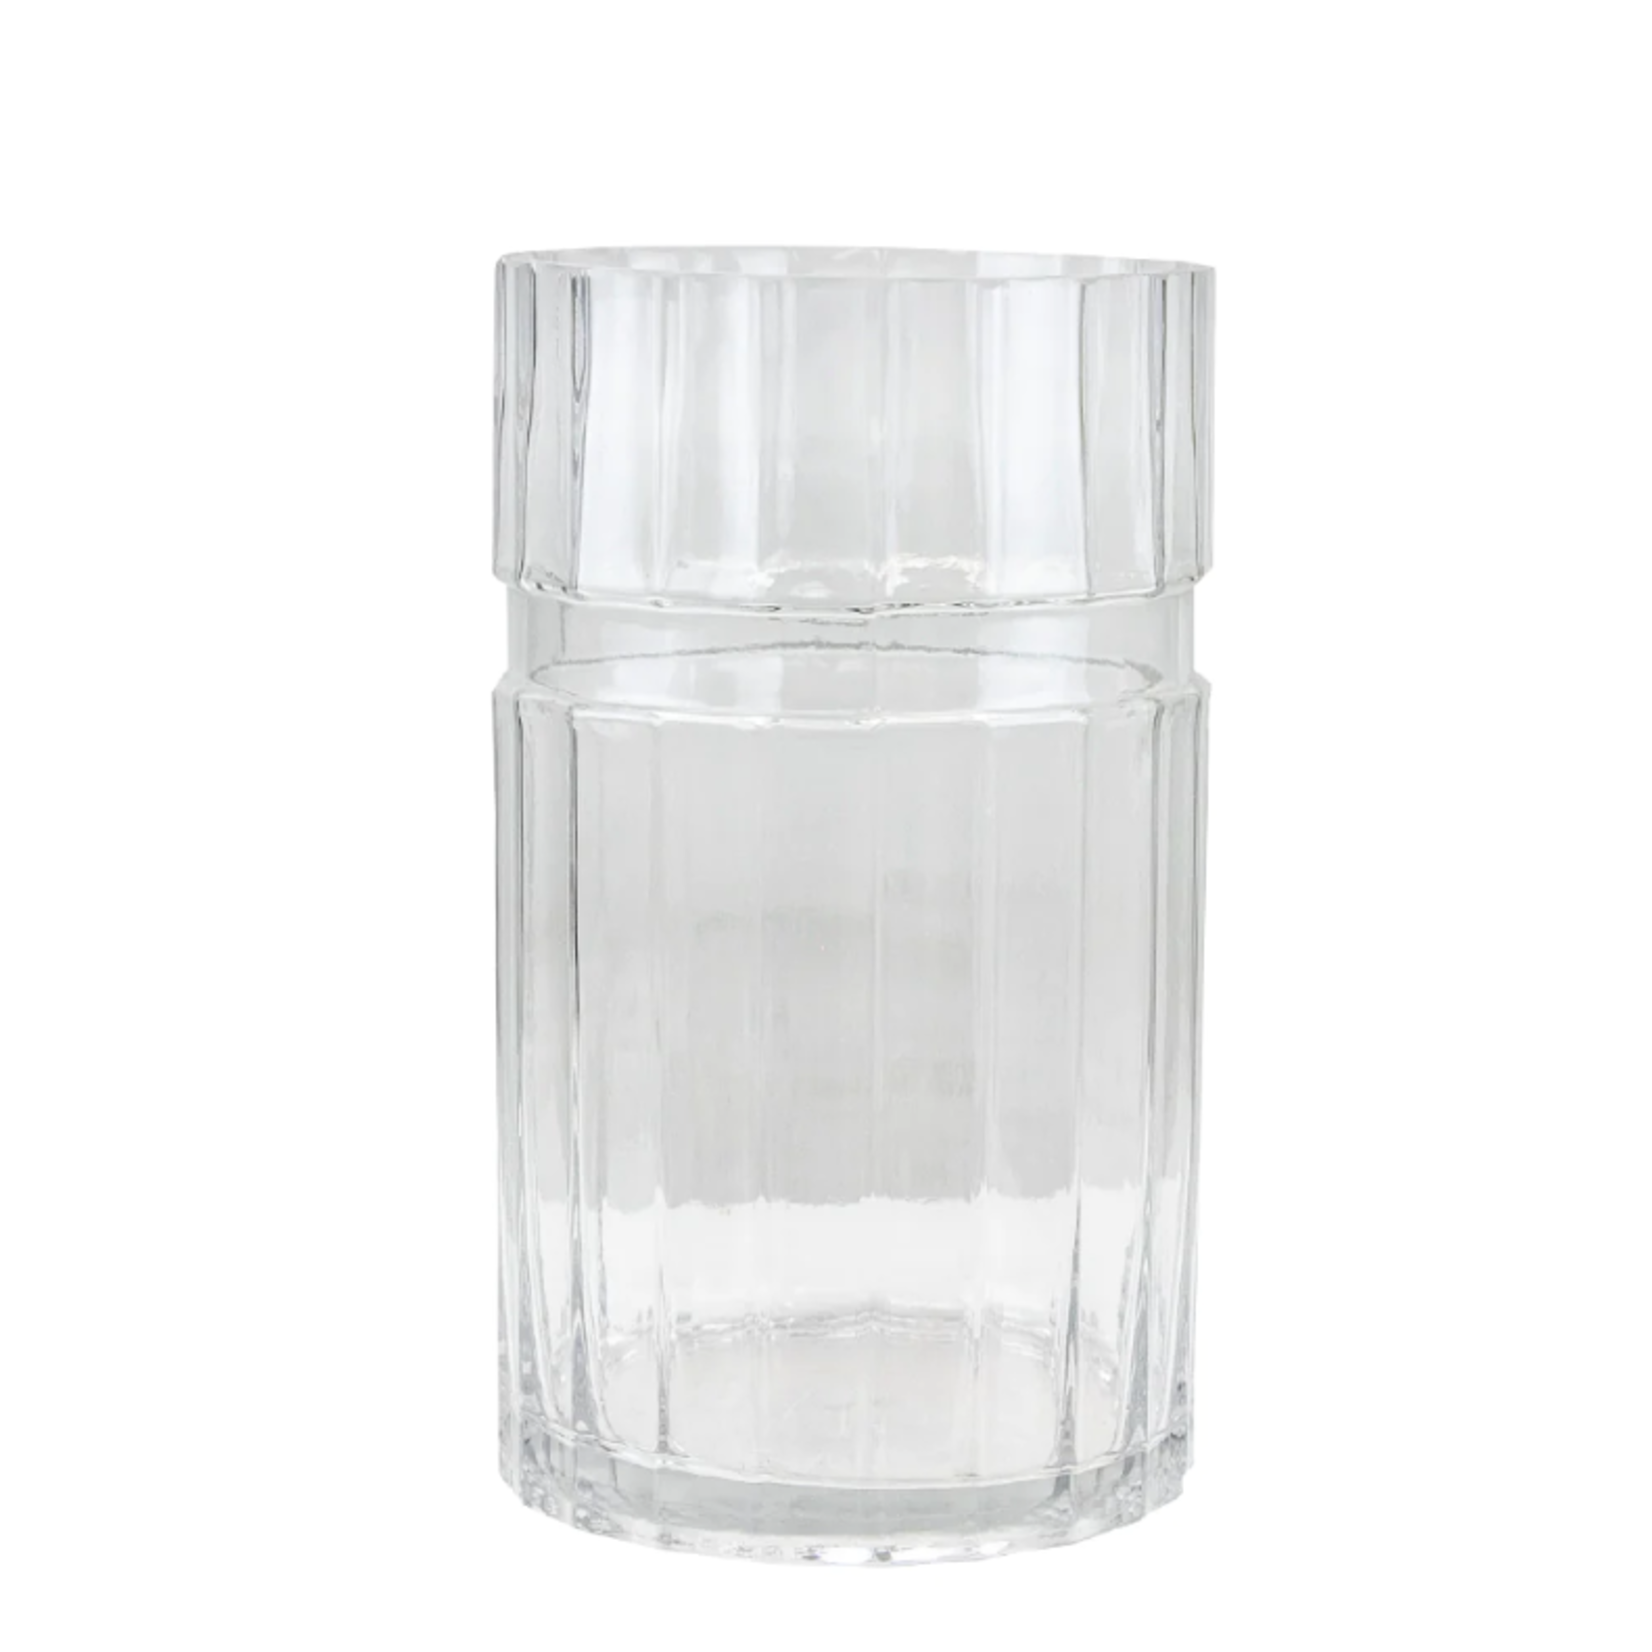 9”H X 5.5” CLEAR GLASS FLUTED LAYLA VASE